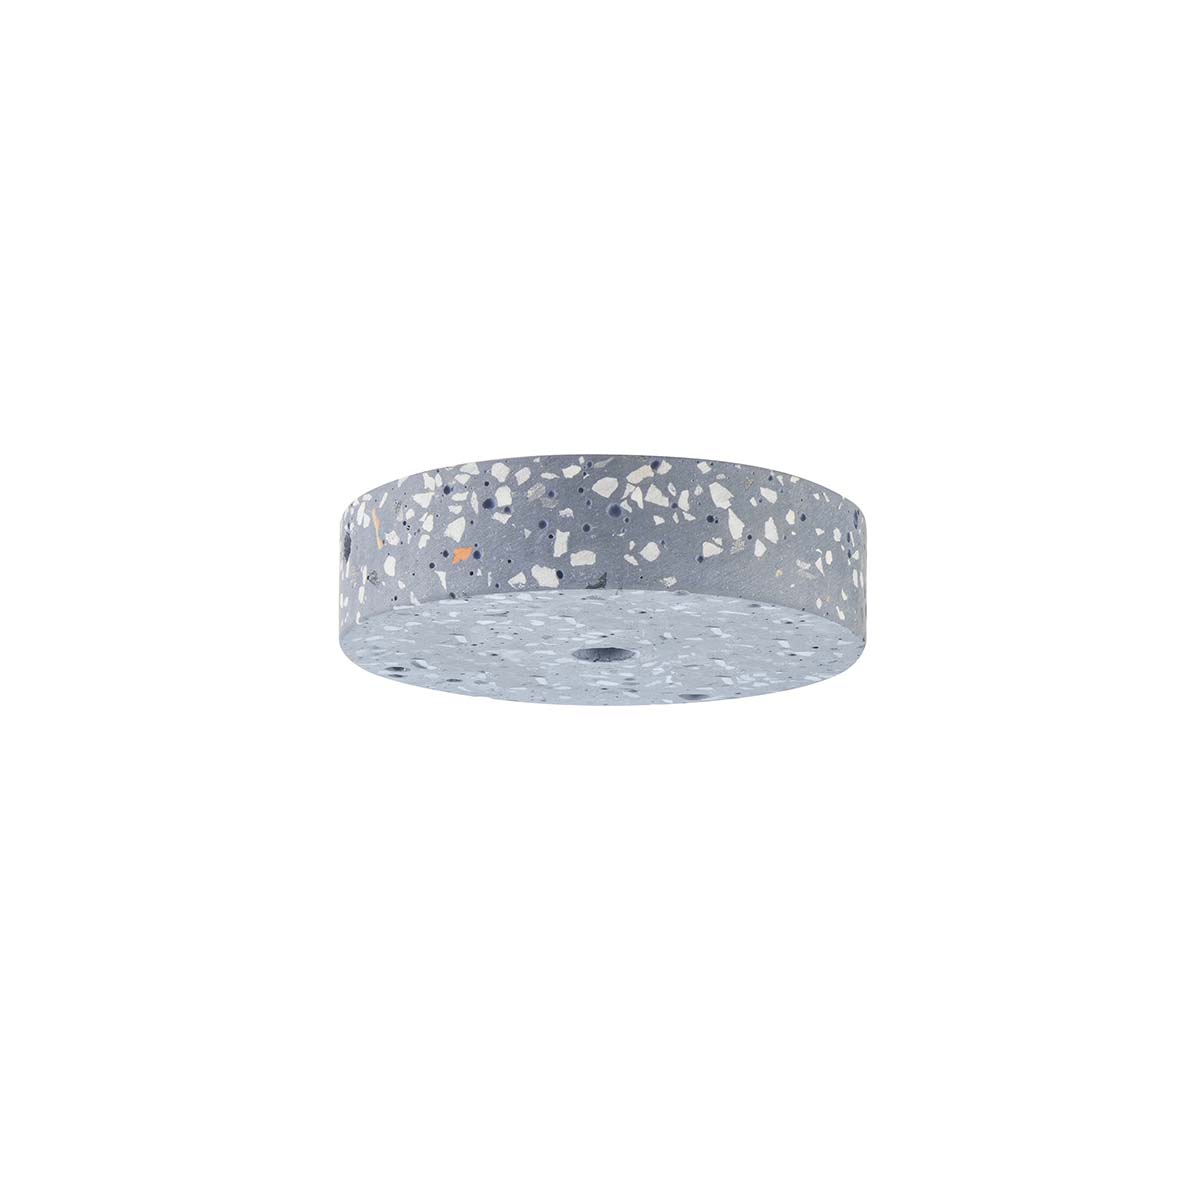 Tangla lighting - TLCP024-01BL - Water stone 1 Light round canopy stage - blue